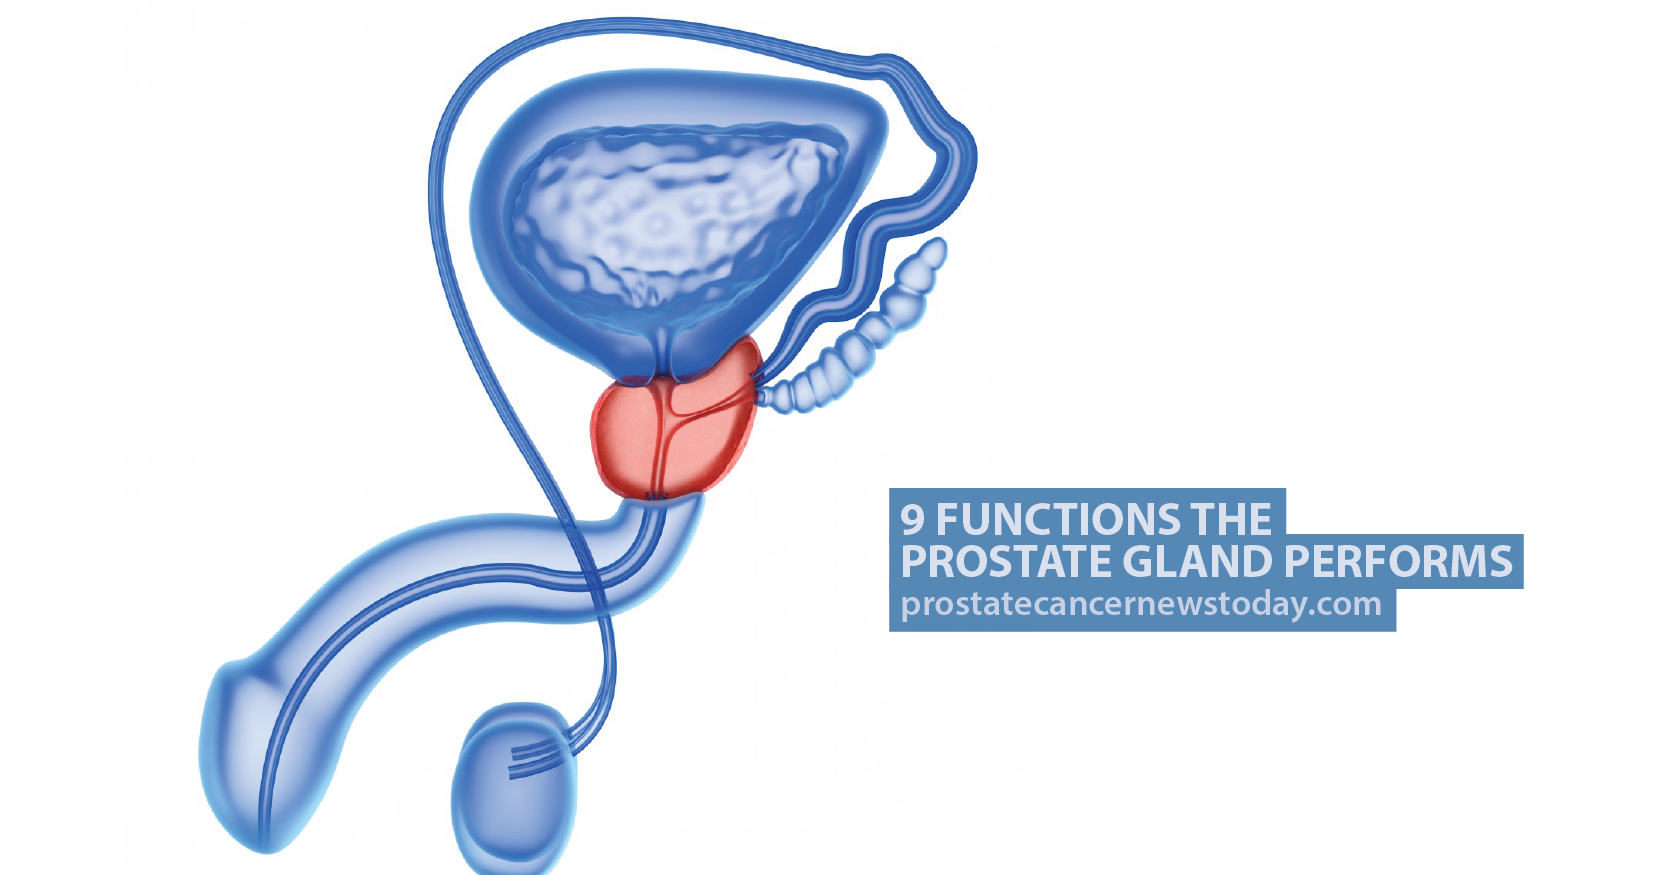 9 Functions the Prostate Gland Performs